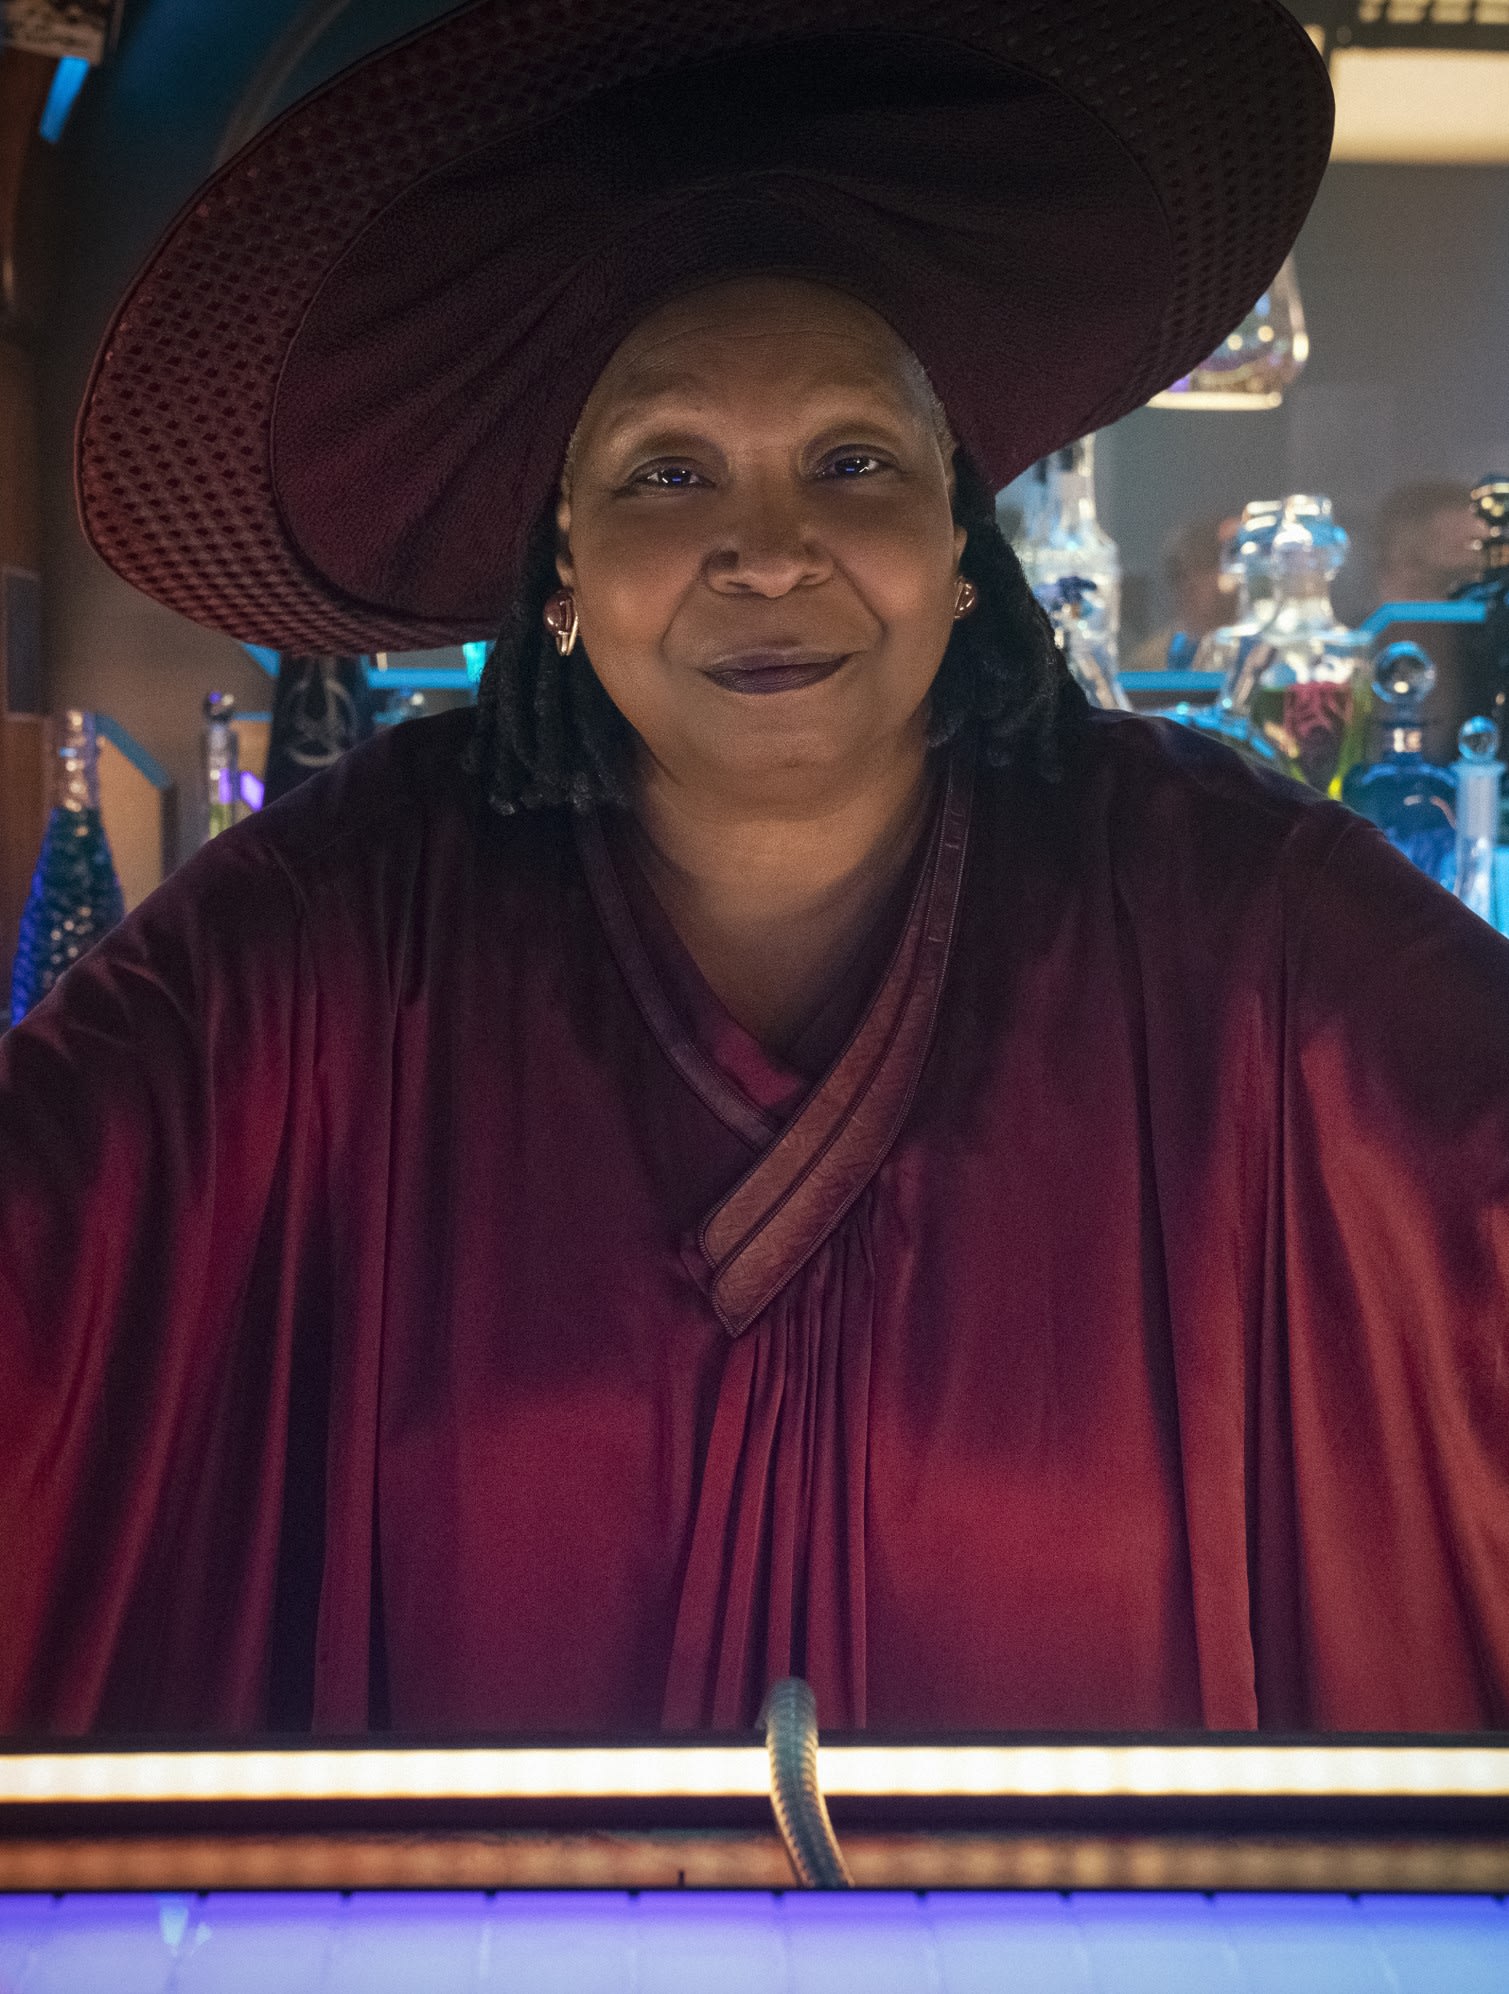 Will Whoopi Goldberg be in Picard?